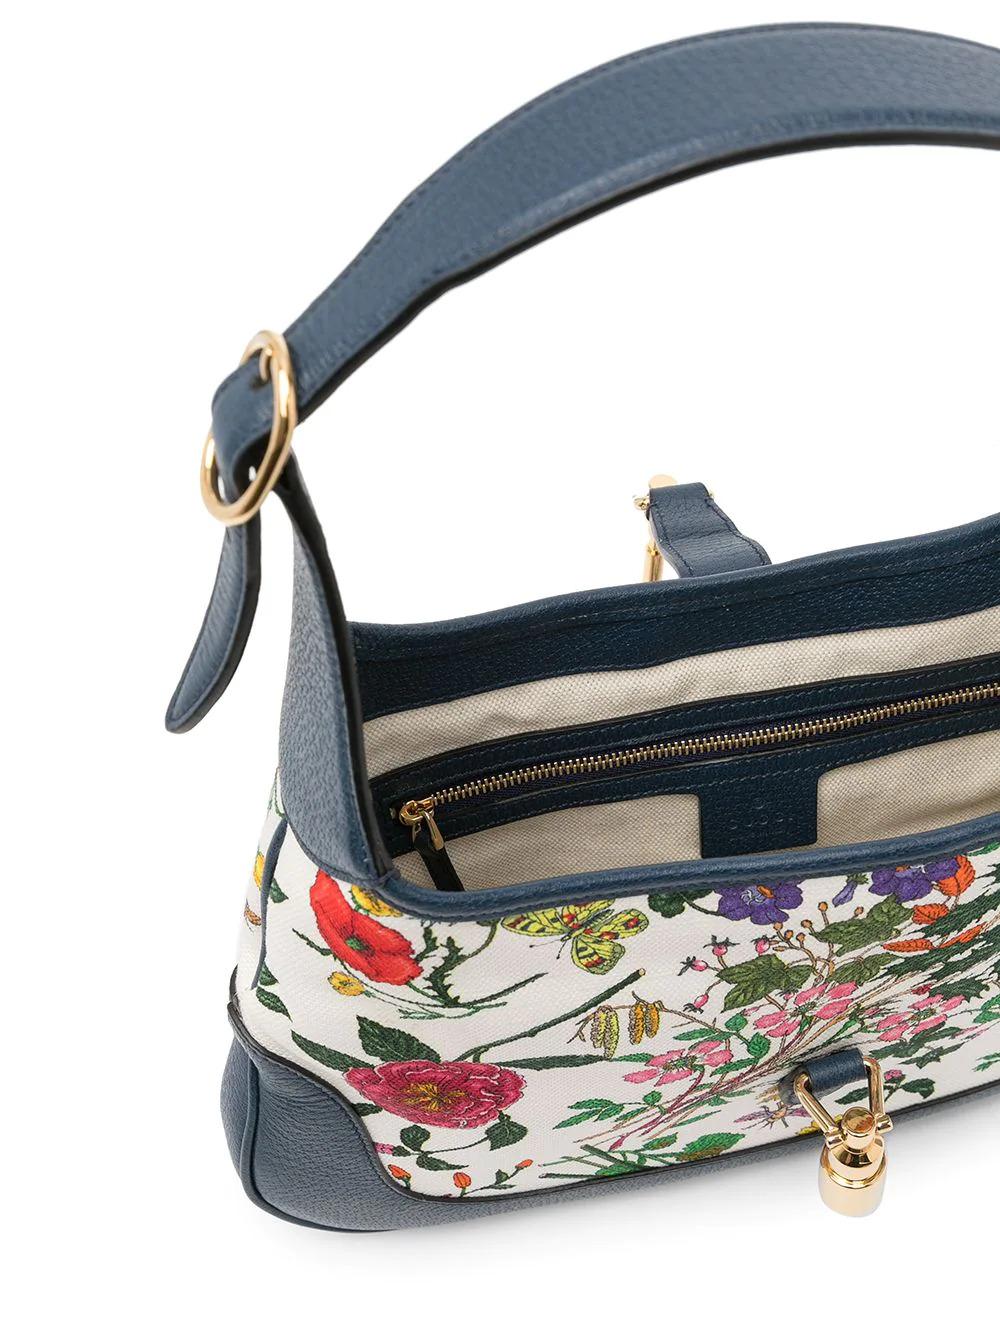 A chic hobo bag chock-full of Gucci grammar, this Jackie bag was named after the first lady, Jackie Kennedy. Known for its curved half-moon shape and piston hardware, this pre-owned handbag features a feminine floral print and navy leather trim.